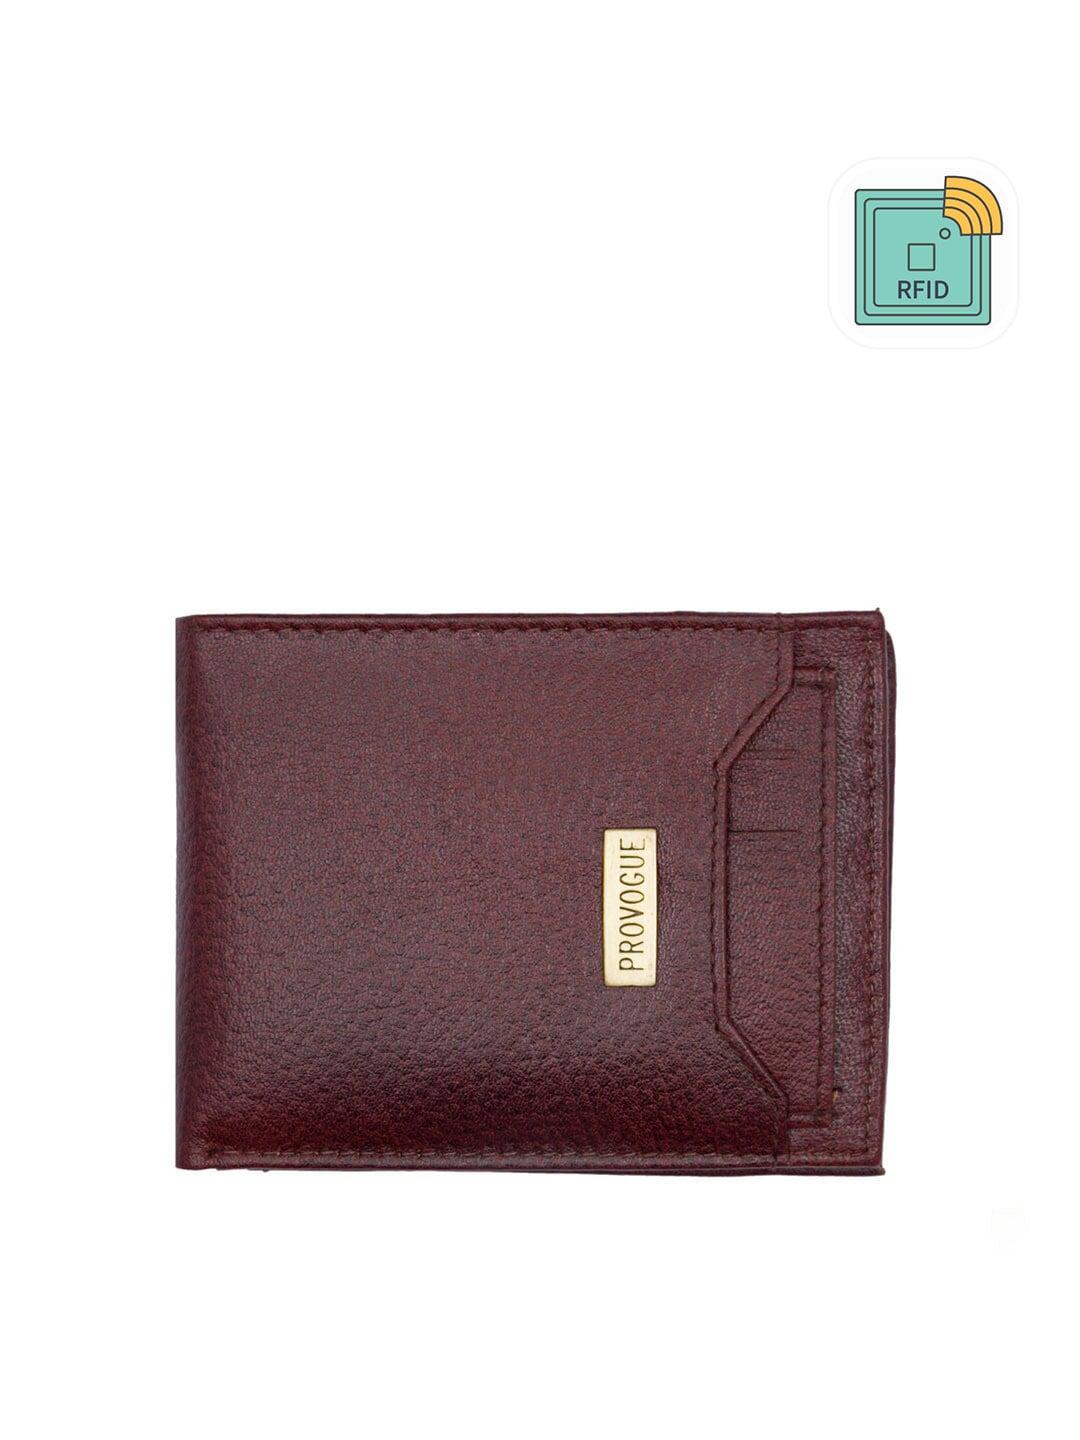 provogue men brown genuine leather rfid two fold wallet